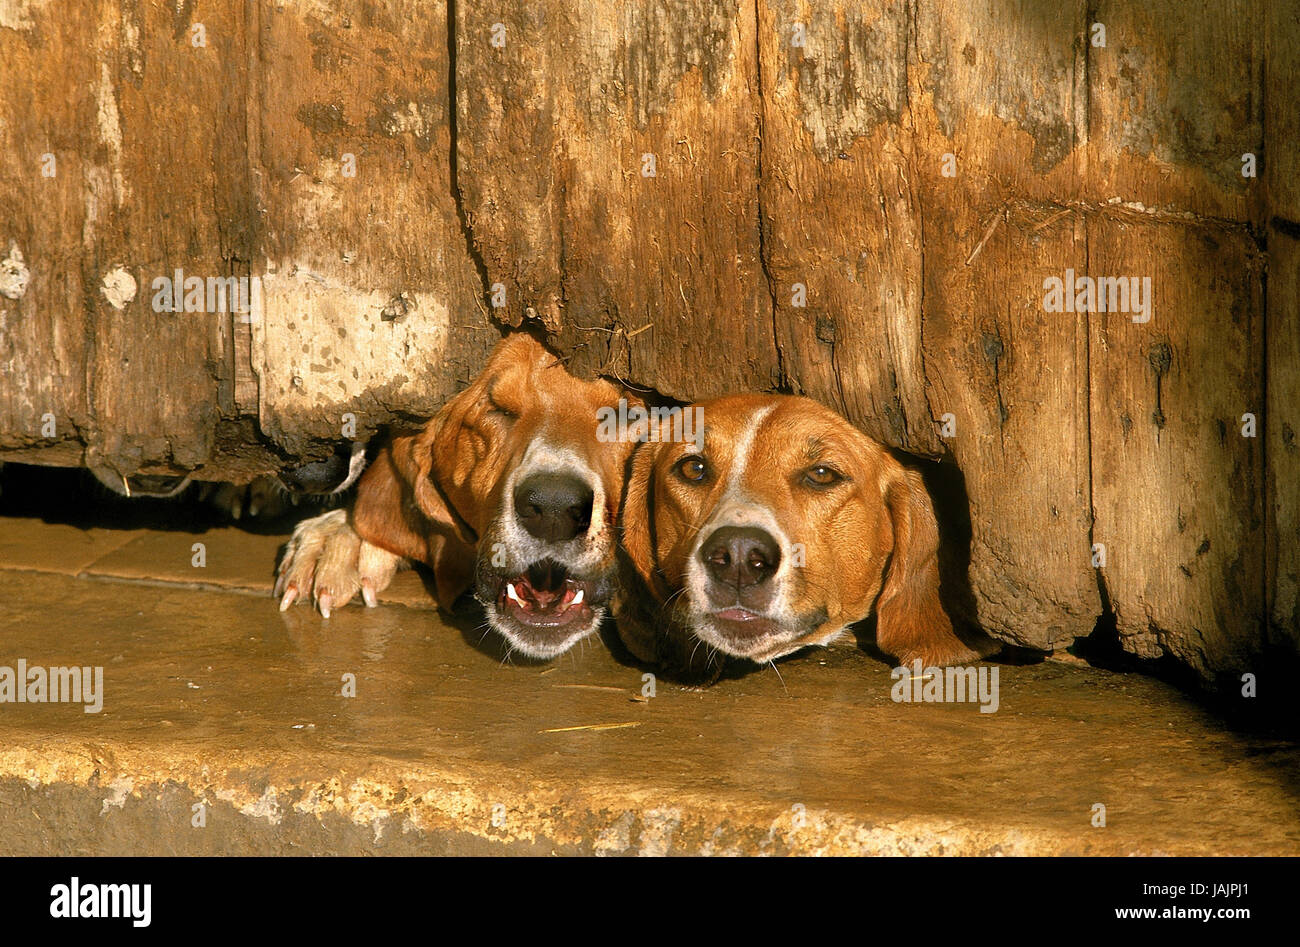 Of big Anglo-French Weiß-Oranger scent hound,dog barking,wooden fence, Stock Photo